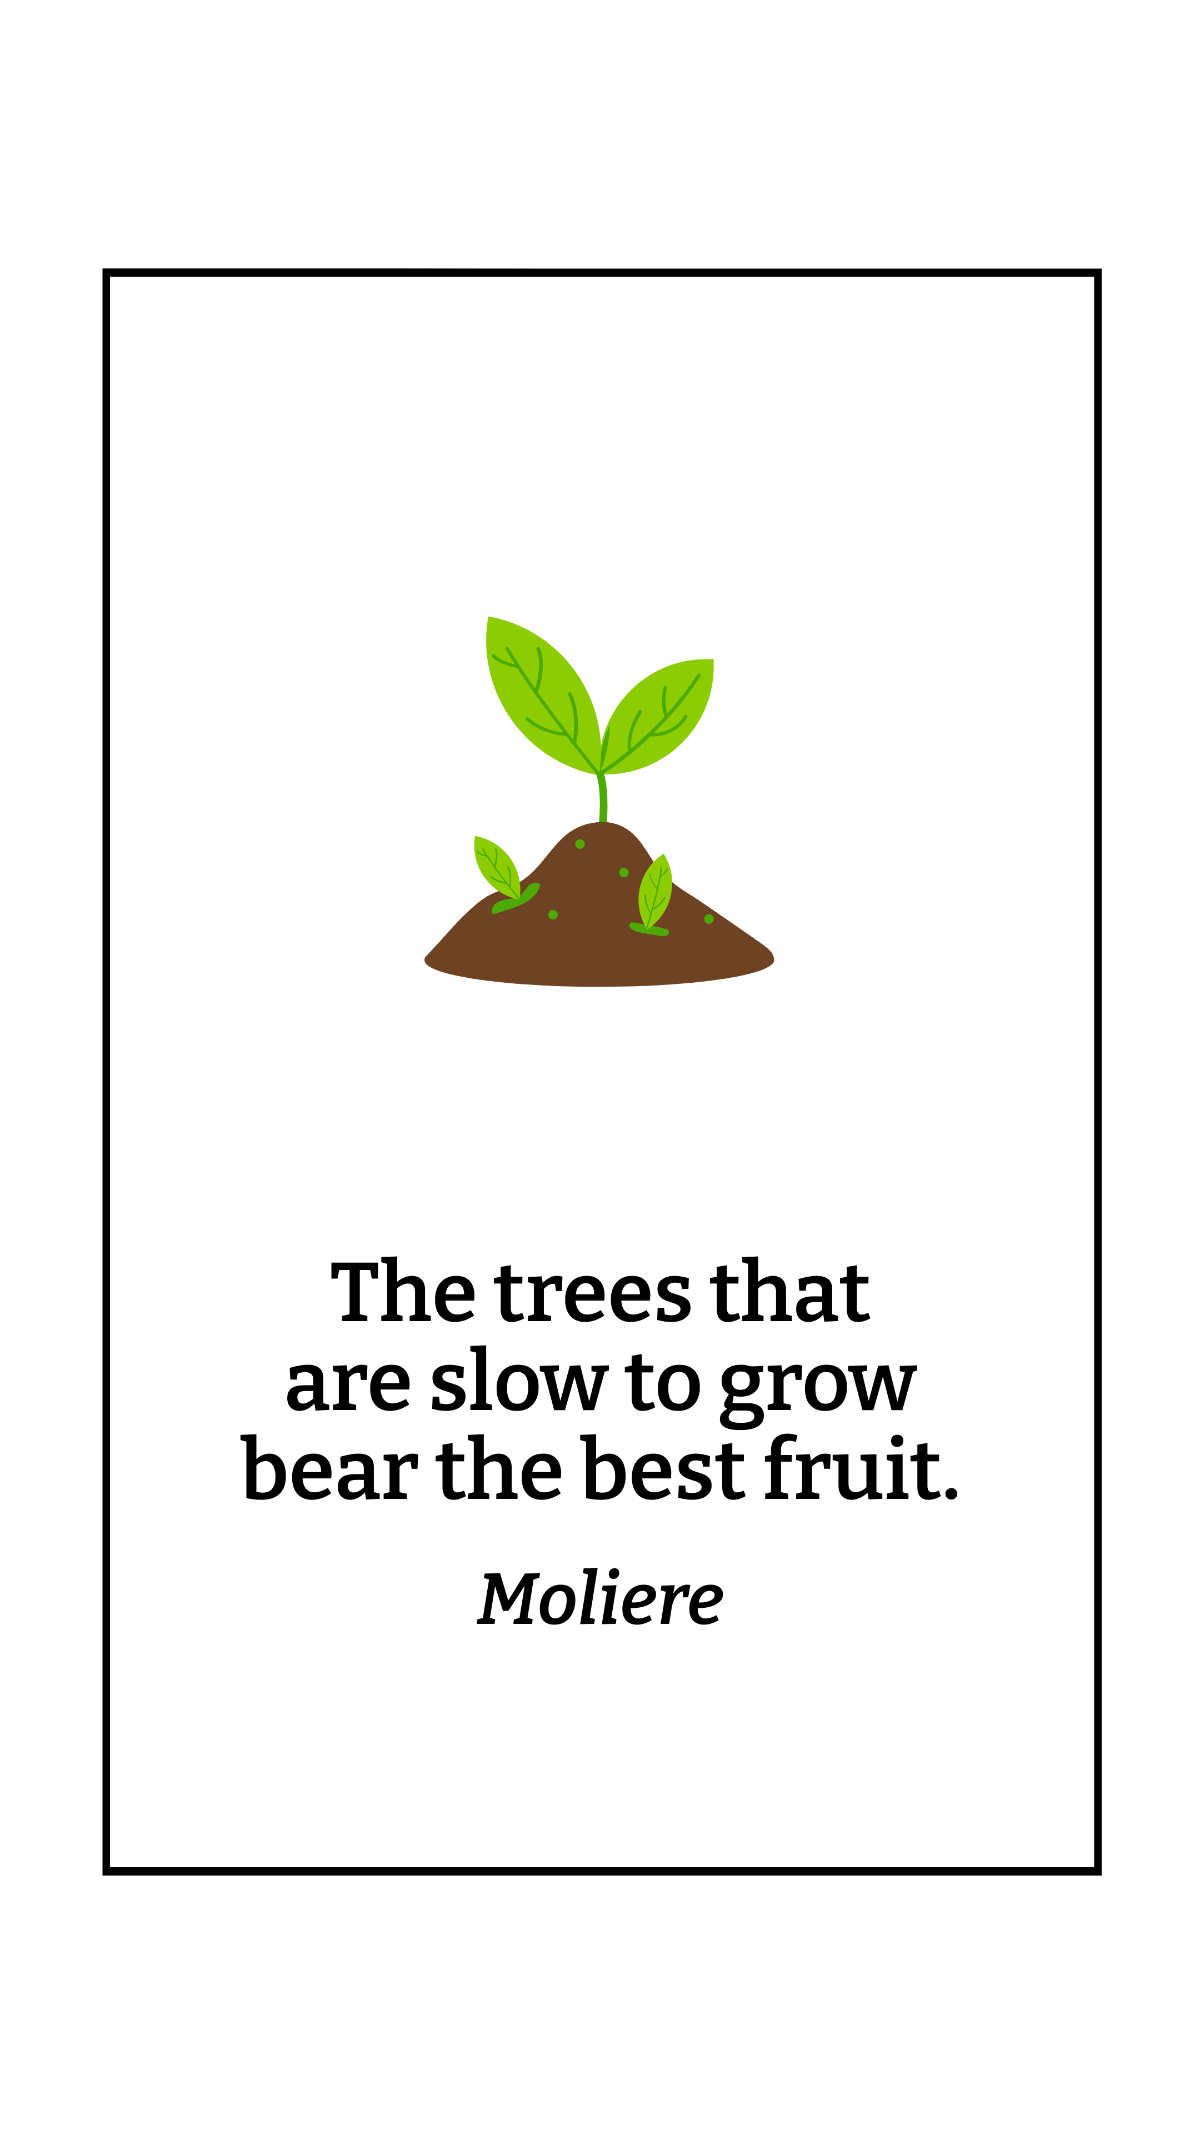 Moliere - The trees that are slow to grow bear the best fruit. Template